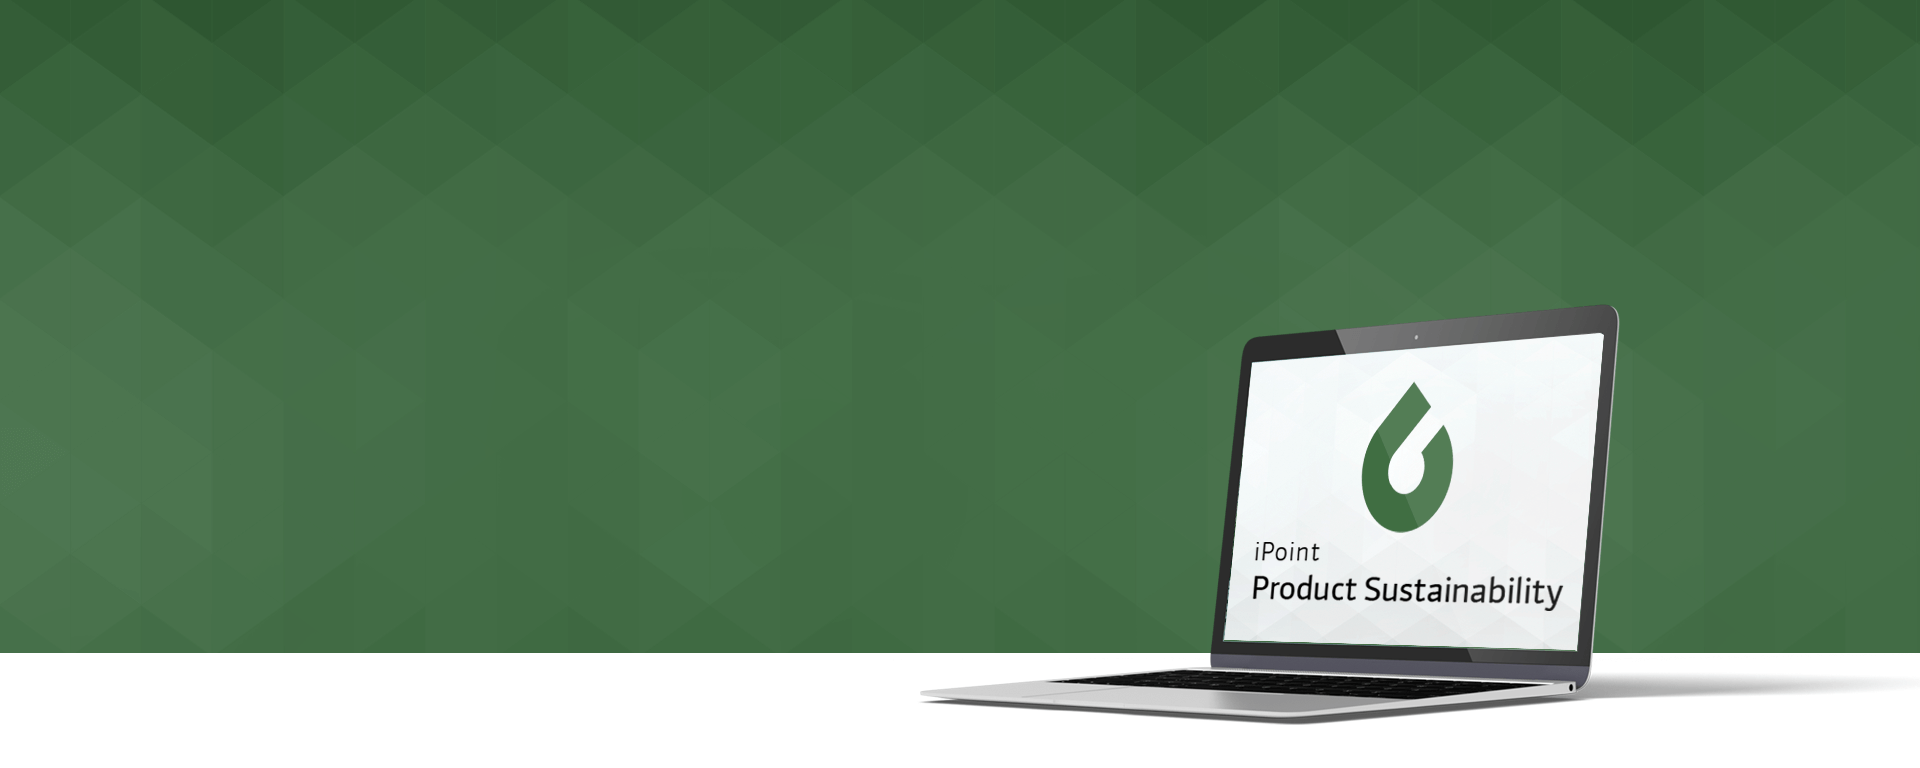 iPoint Product Sustainability Header